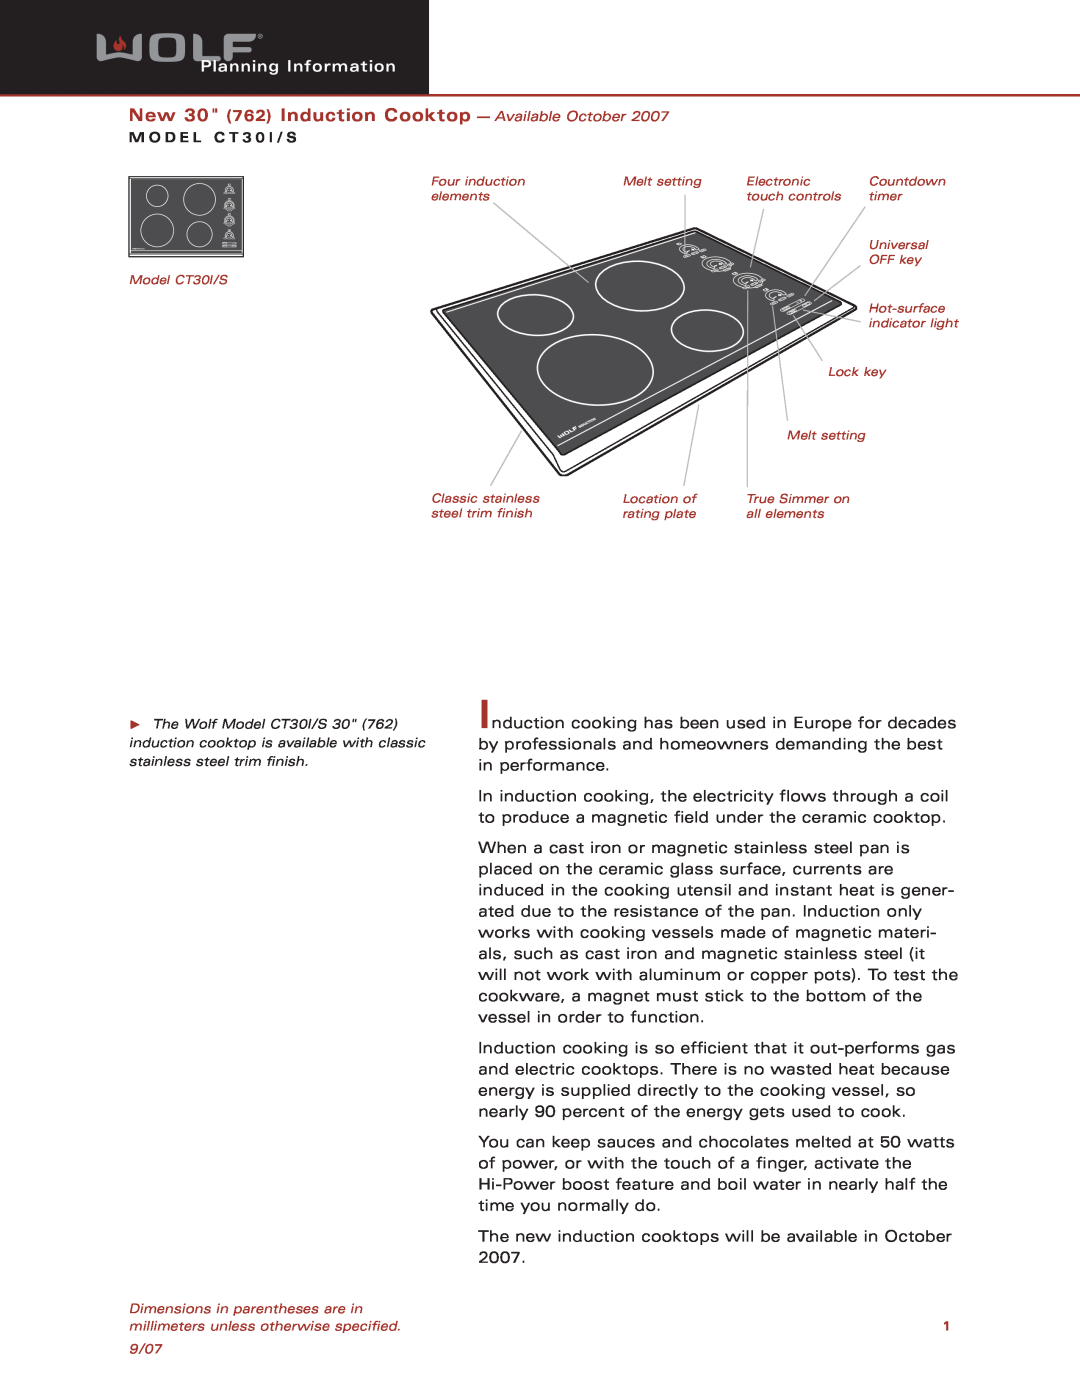 Wolf Appliance Company CT30S dimensions New 30 762 Induction Cooktop - Available October, Planning Information 